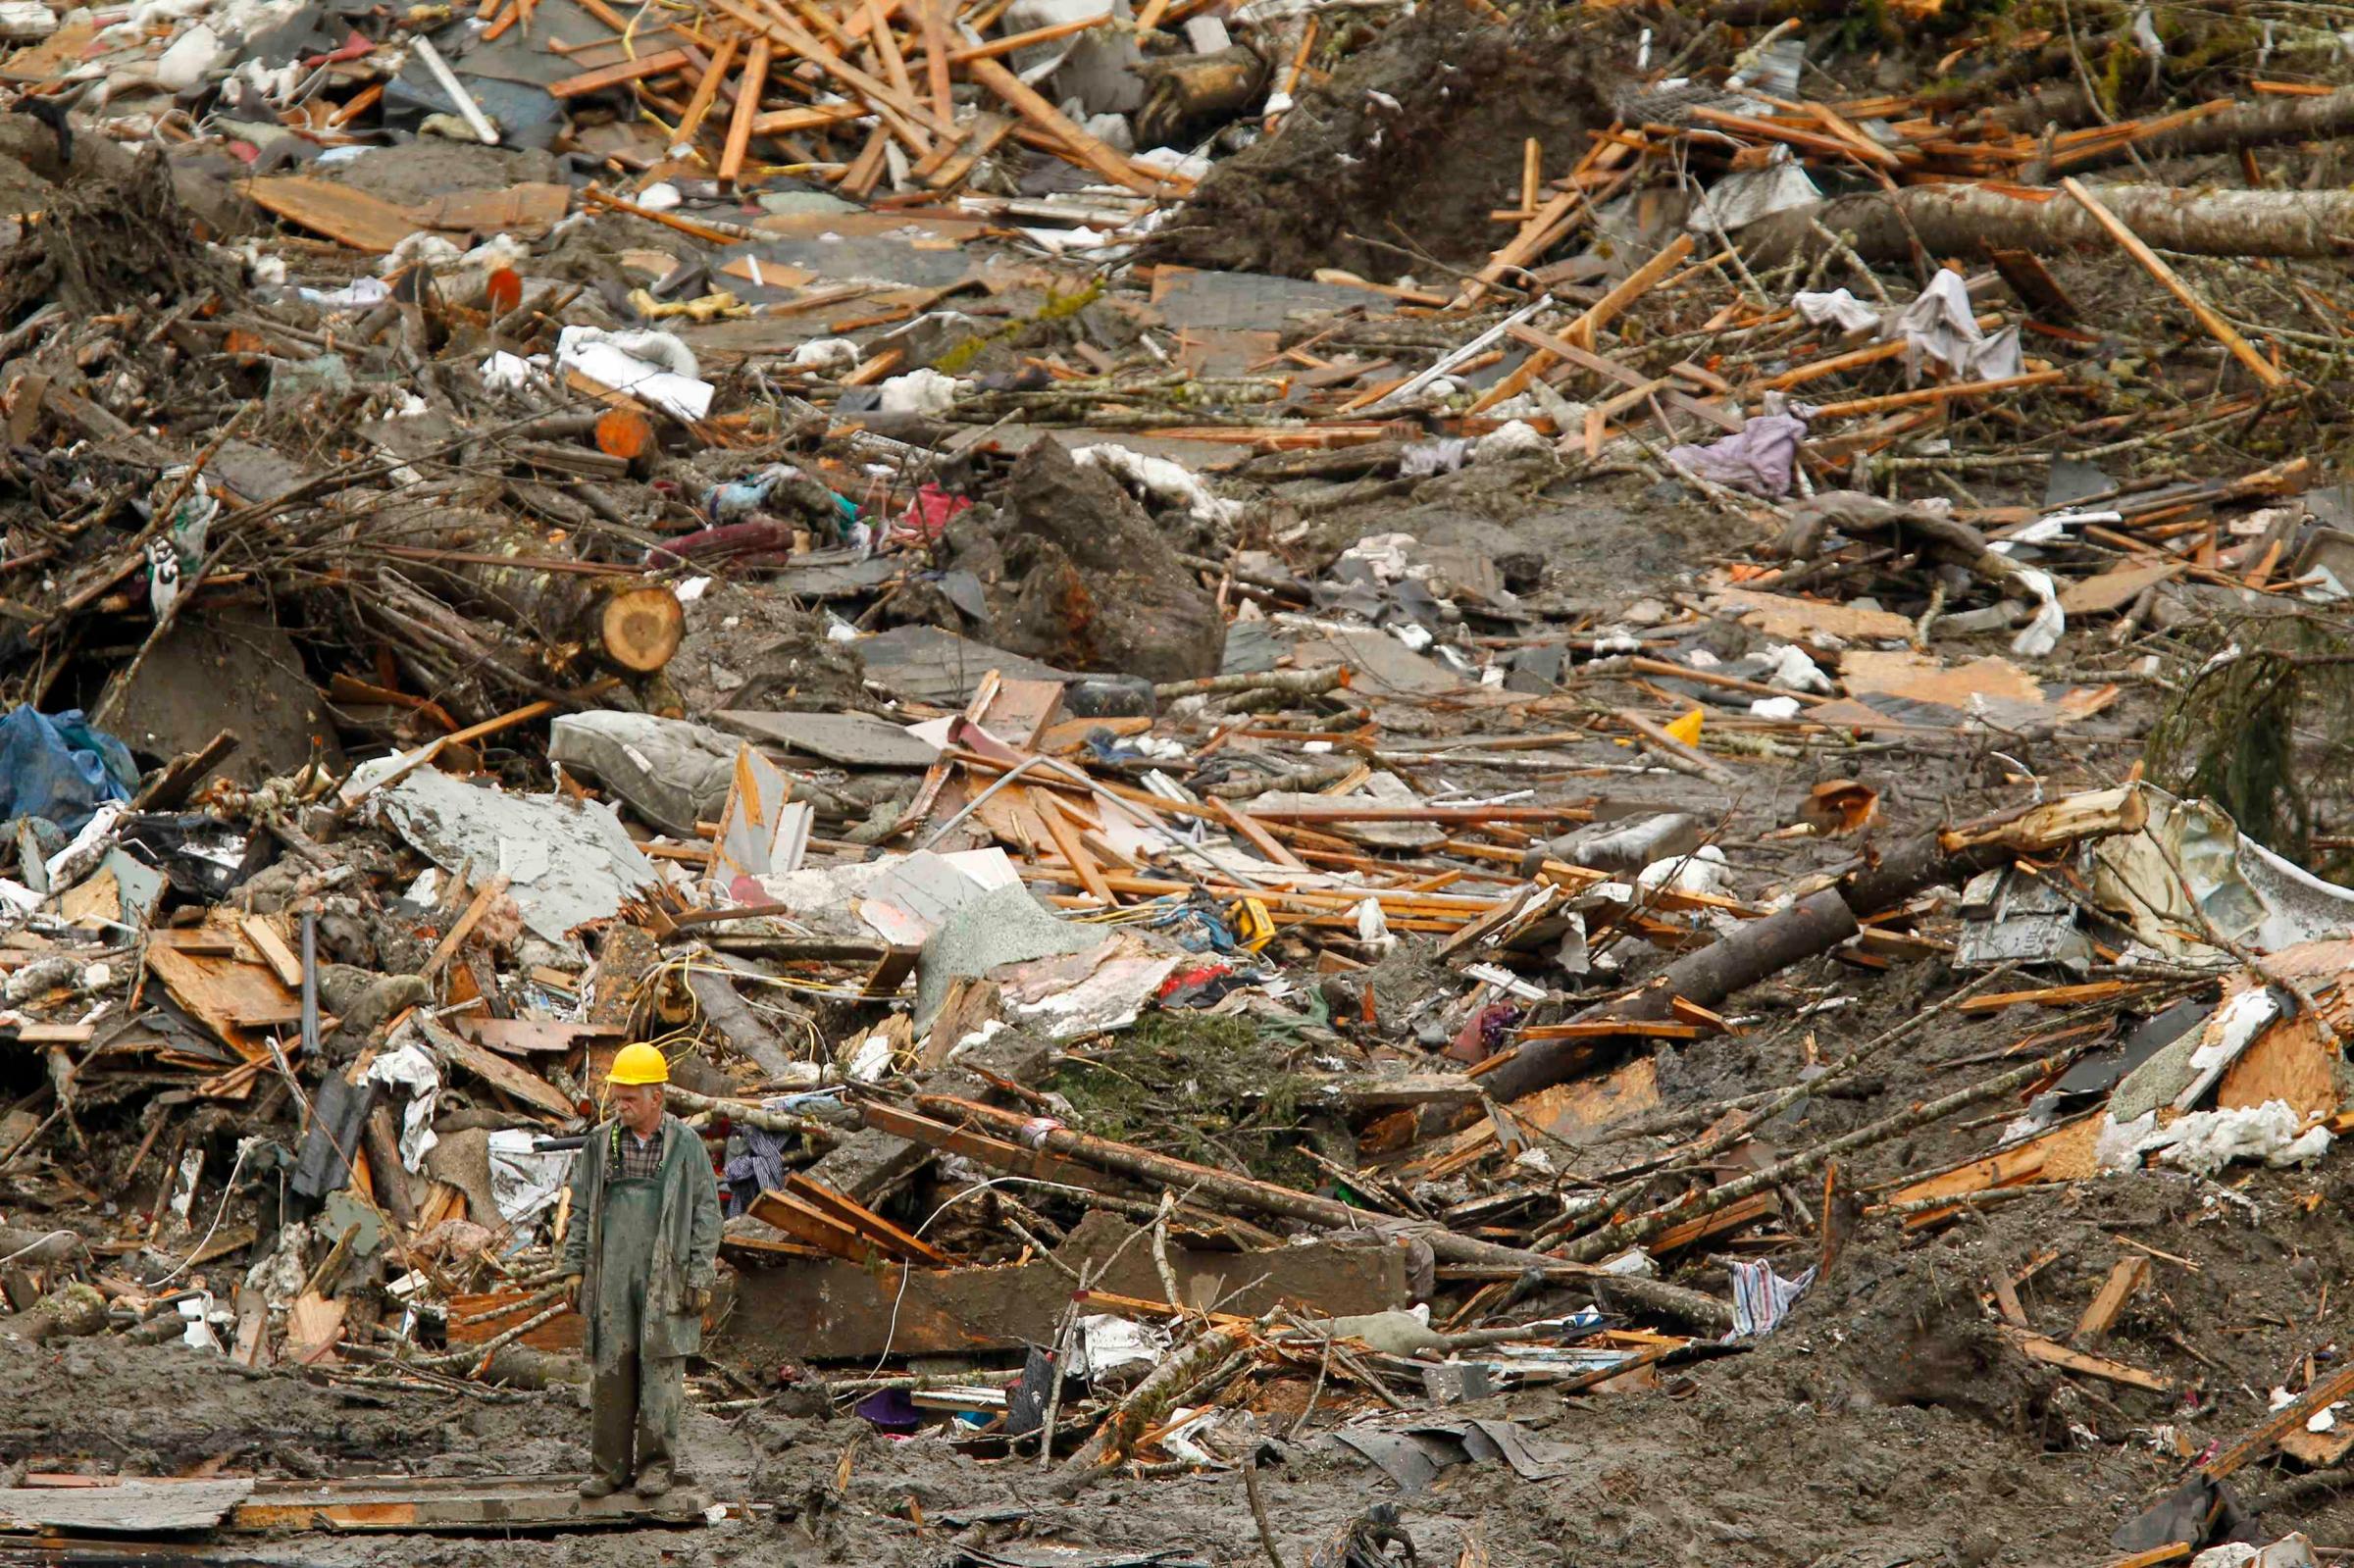 Rescue worker looks over the debris pile from the mudslide in Oso